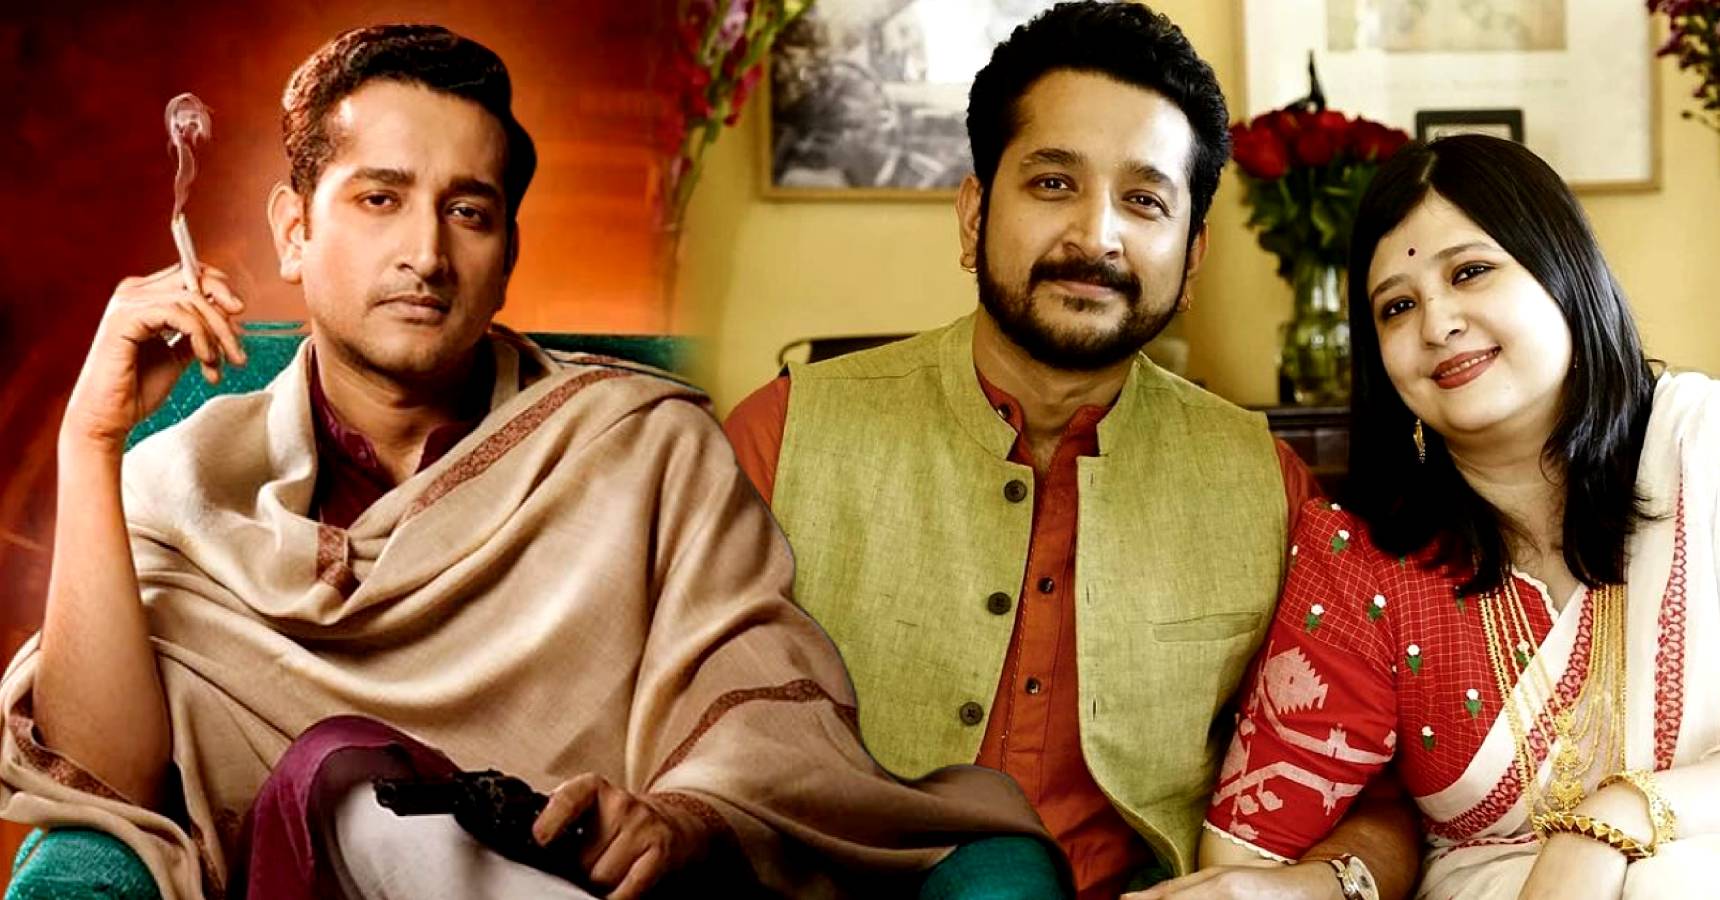 Parambrata Chatterjee wife Piya Chakraborty to undergo a surgery day after marriage